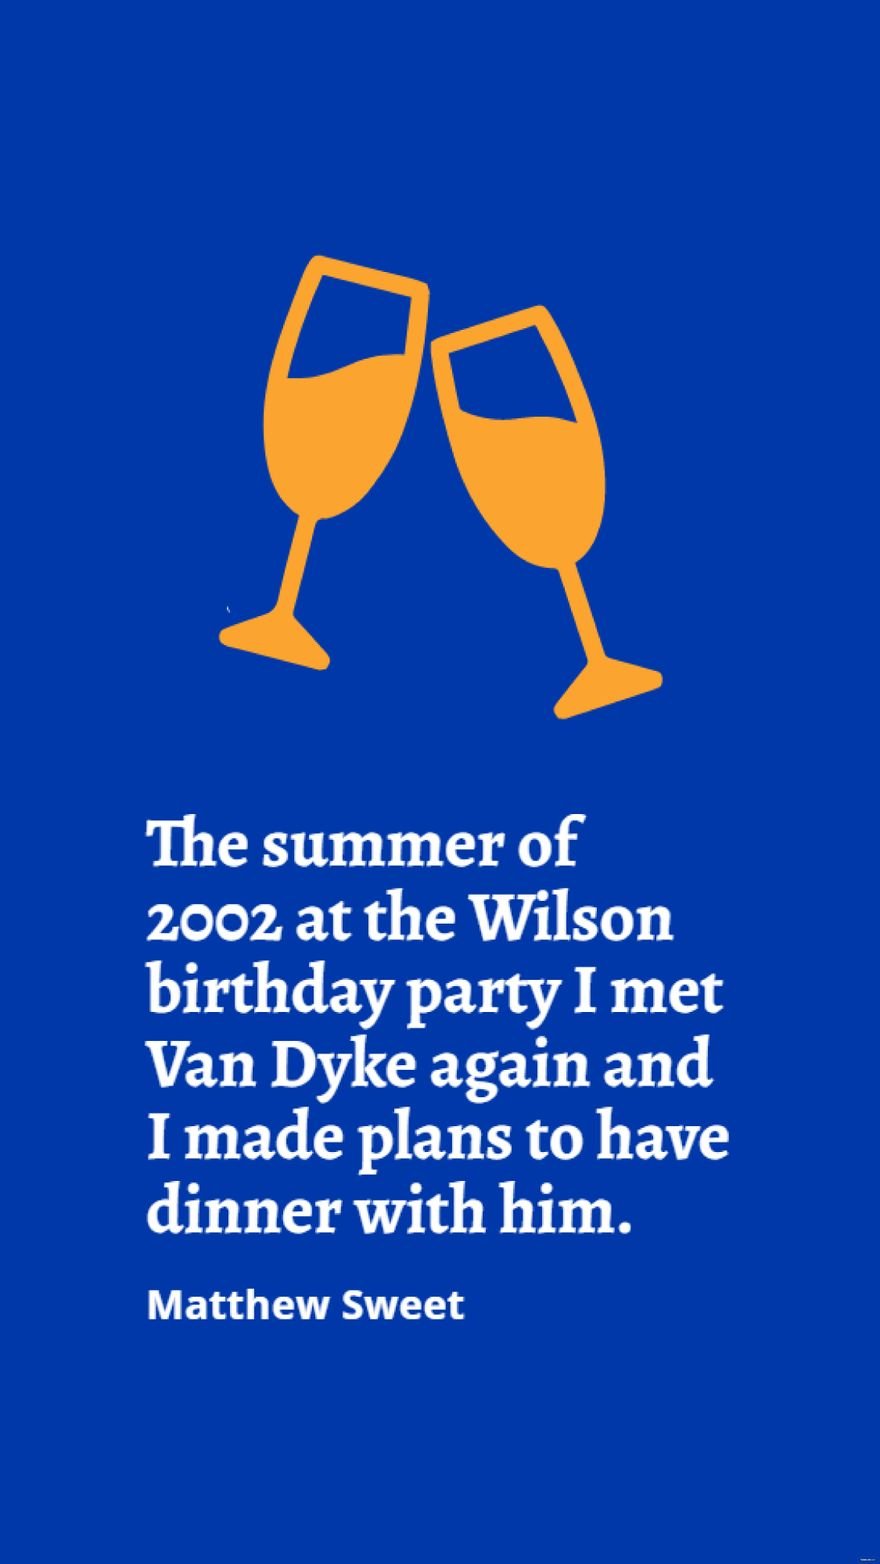 Free Matthew Sweet - The summer of 2002 at the Wilson birthday party I met Van Dyke again and I made plans to have dinner with him. in JPG